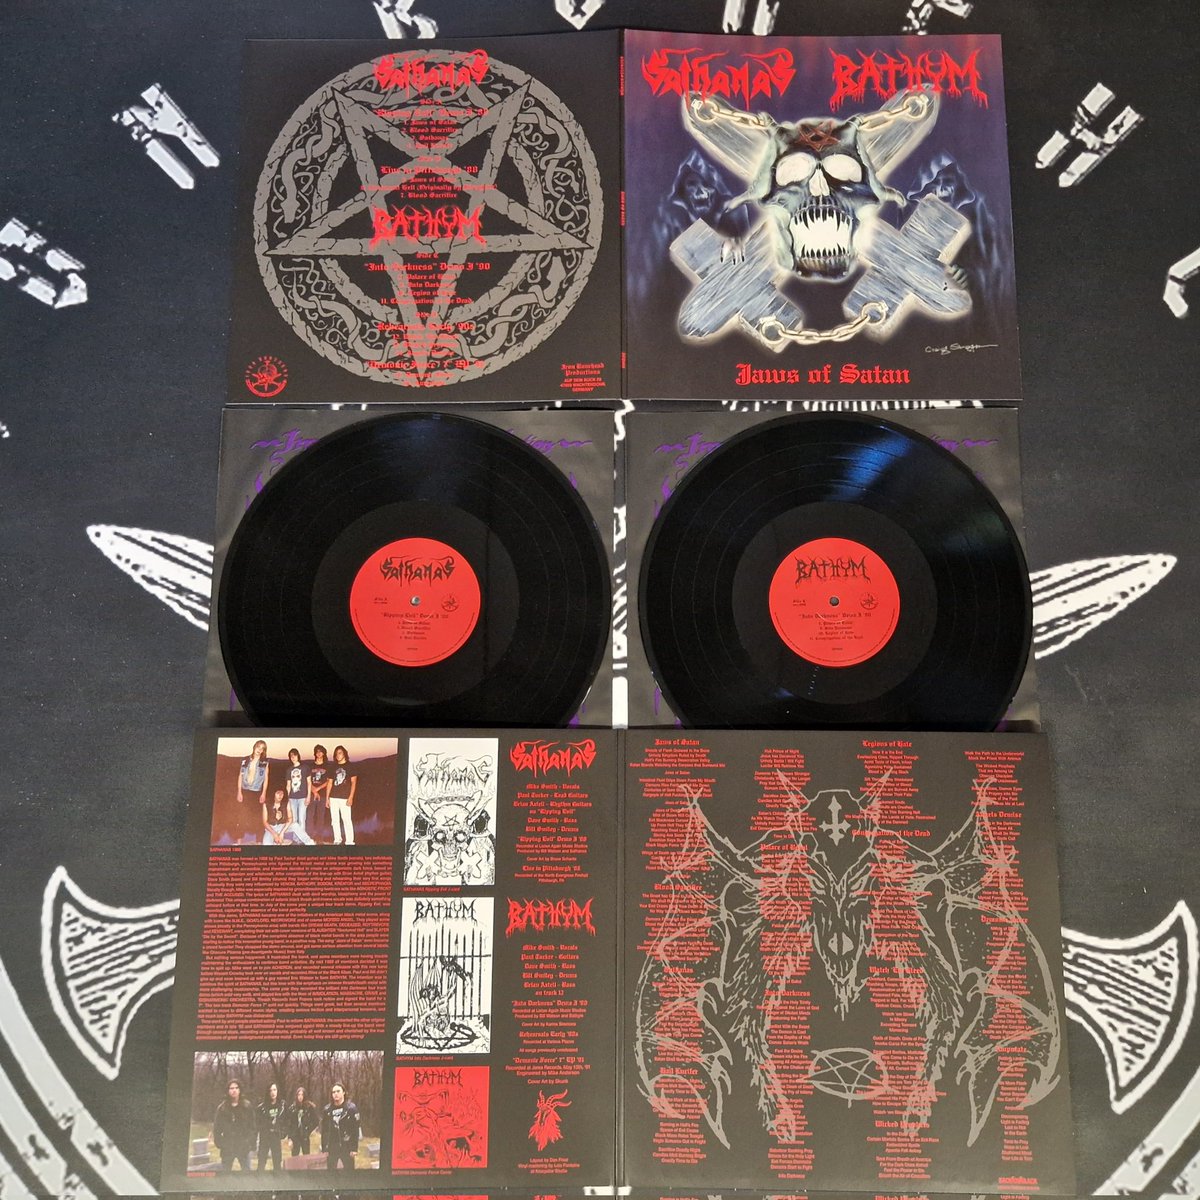 OUT NOW! SATHANAS / BATHYM (U.S.A.) 'Jaws of Satan' 12'Double LP - 350gsm Gatefold Jacket with inside flooded in black and matt varnish - 2x 140g Black Vinyl - Vinyl mastering by Krucyator Studio - Layout restoration by Dan Fried - Licensed from Audioplatter Ltd. - Limited to